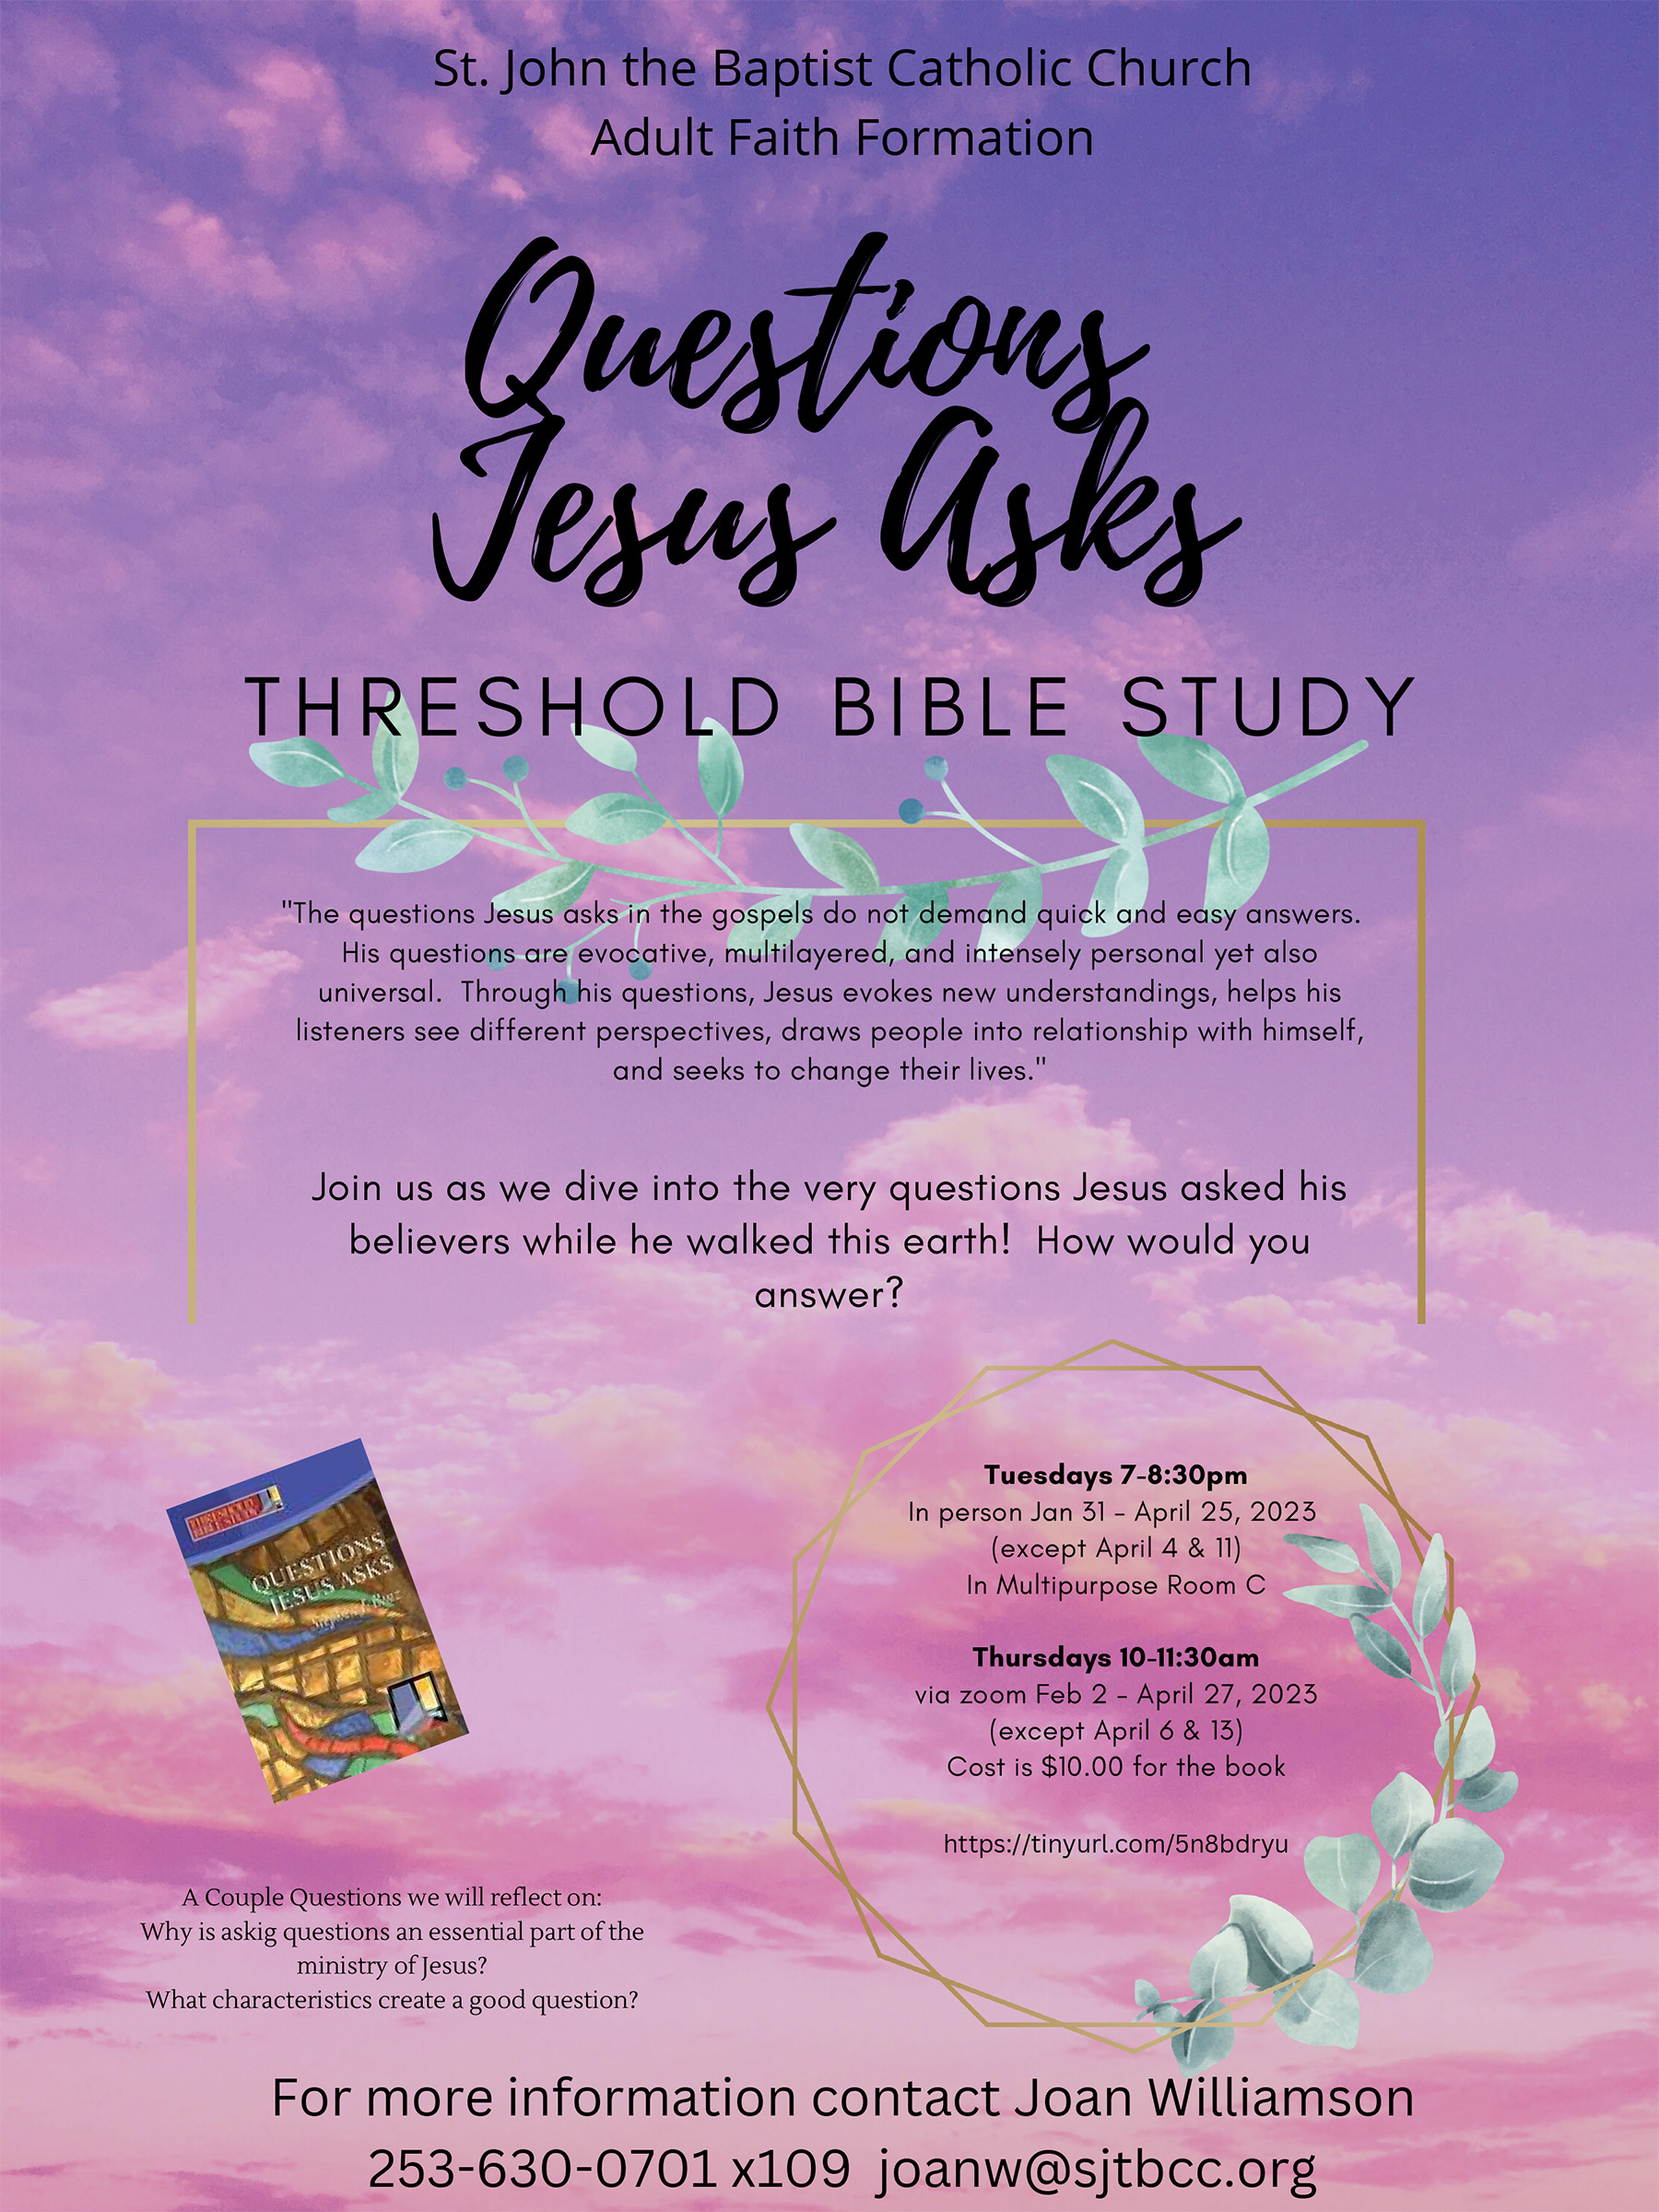 Questions Jesus Asks - Threshold Bible Study